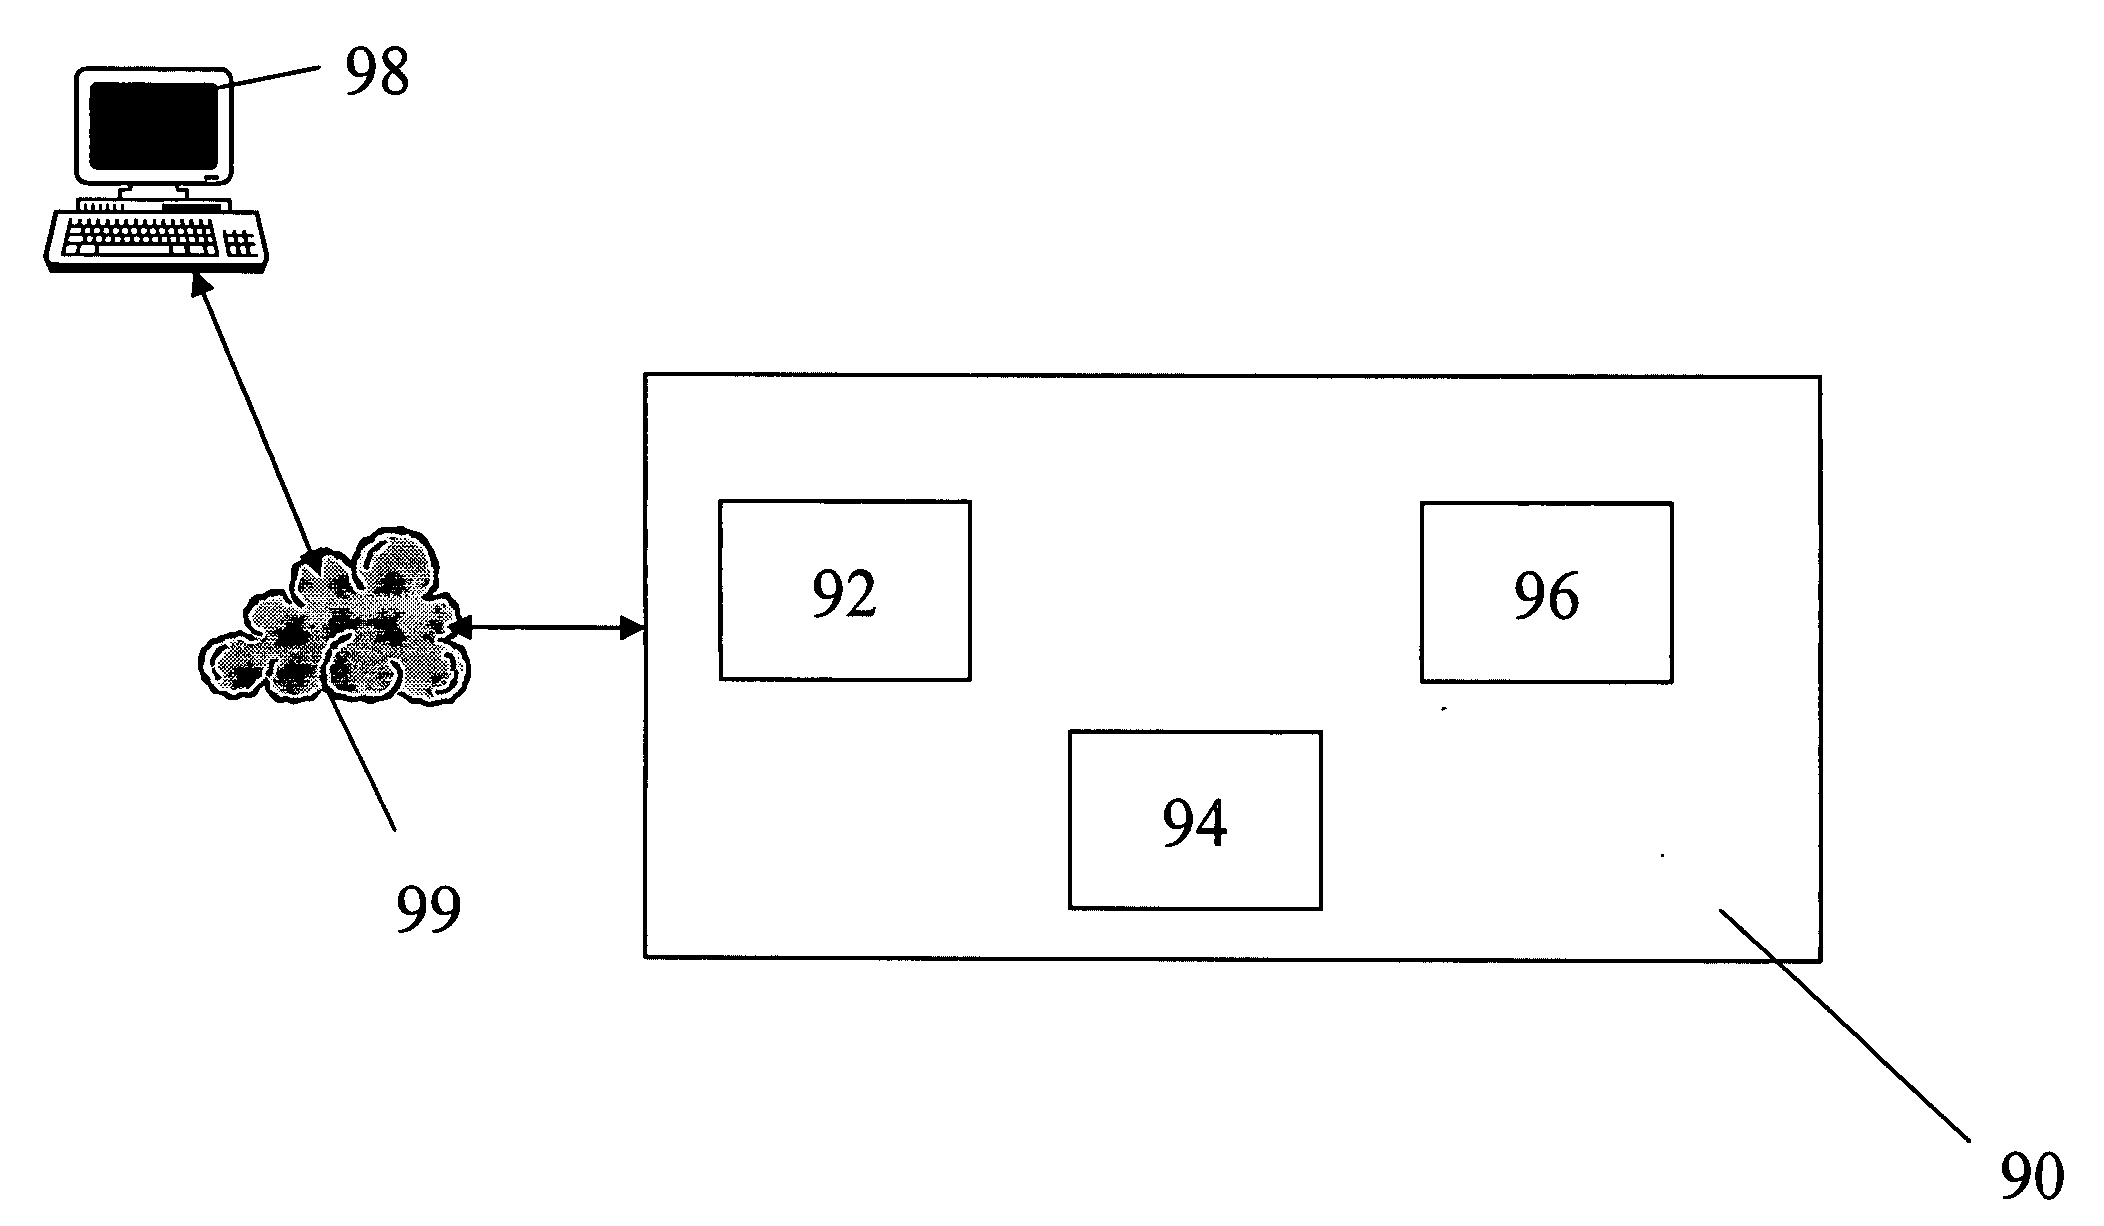 System and method for building and providing a universal product configuration system for arbitrary domains